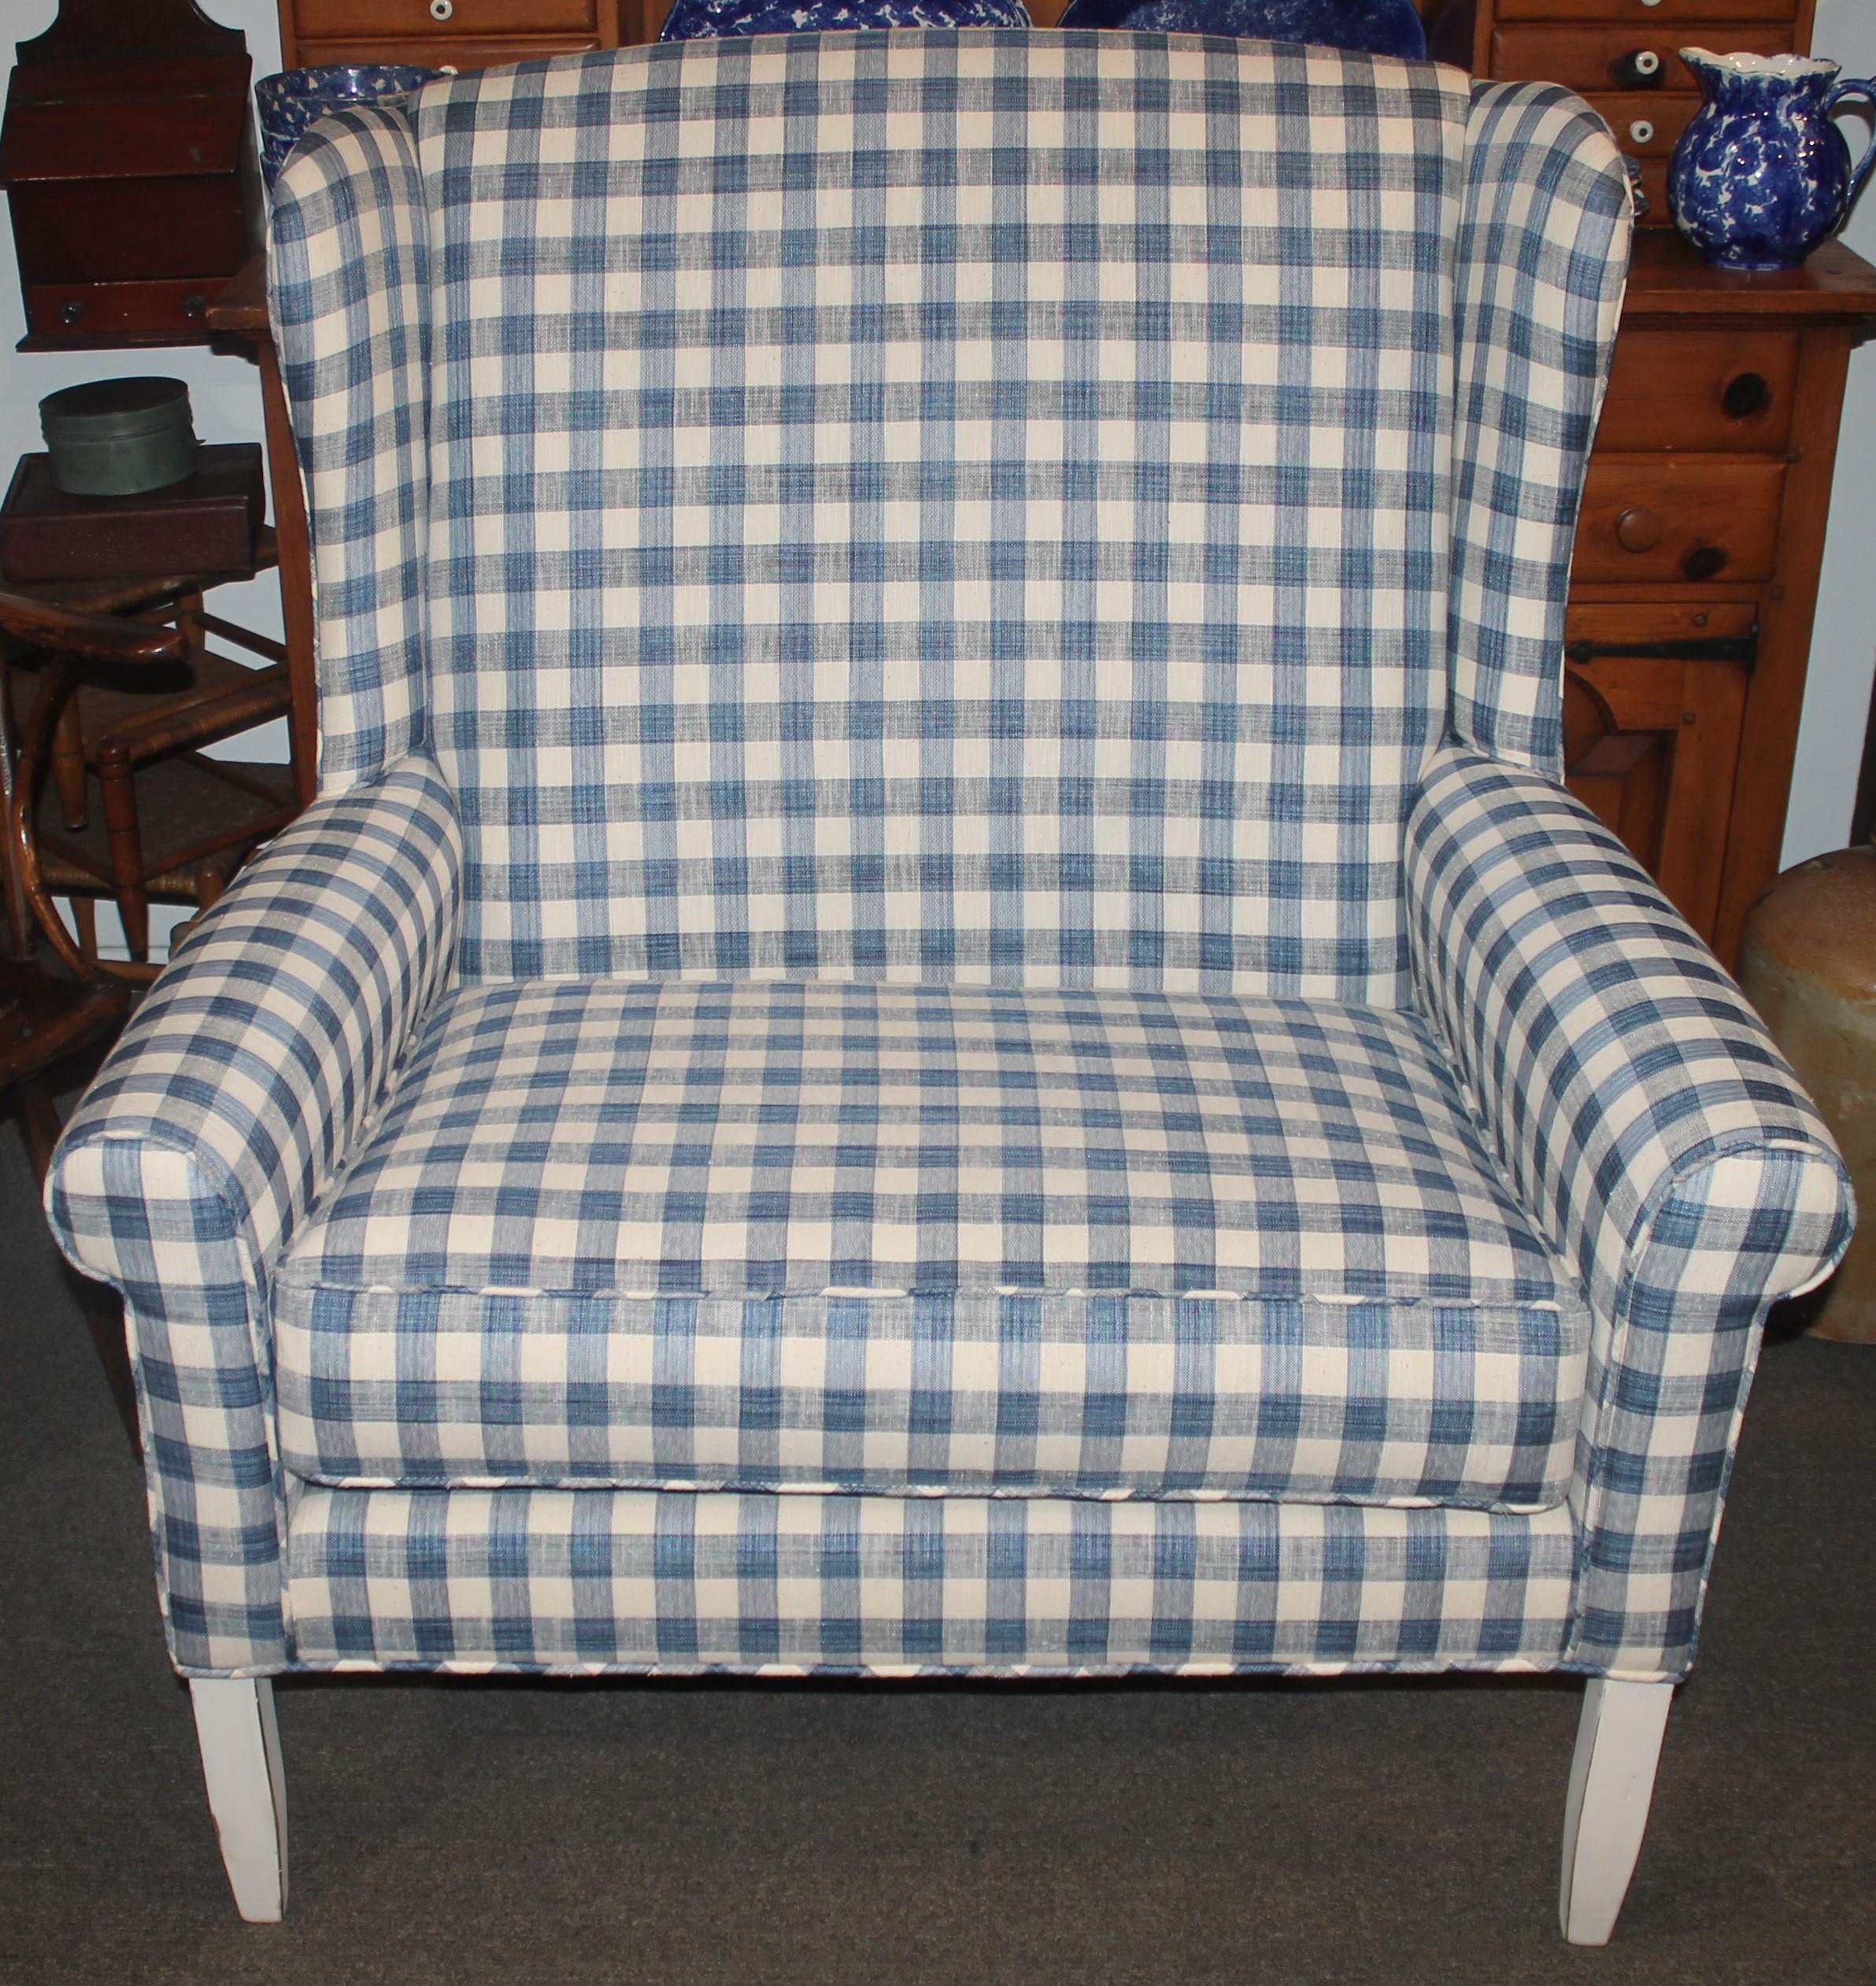 This fantastic wingback love seat is in amazing condition and great form. The repro. blue & cream homespun linen upholstered love seat is amazing. The new fabric looks like early 19thc fabric. The frame is in a worn white paint. The cushion has a